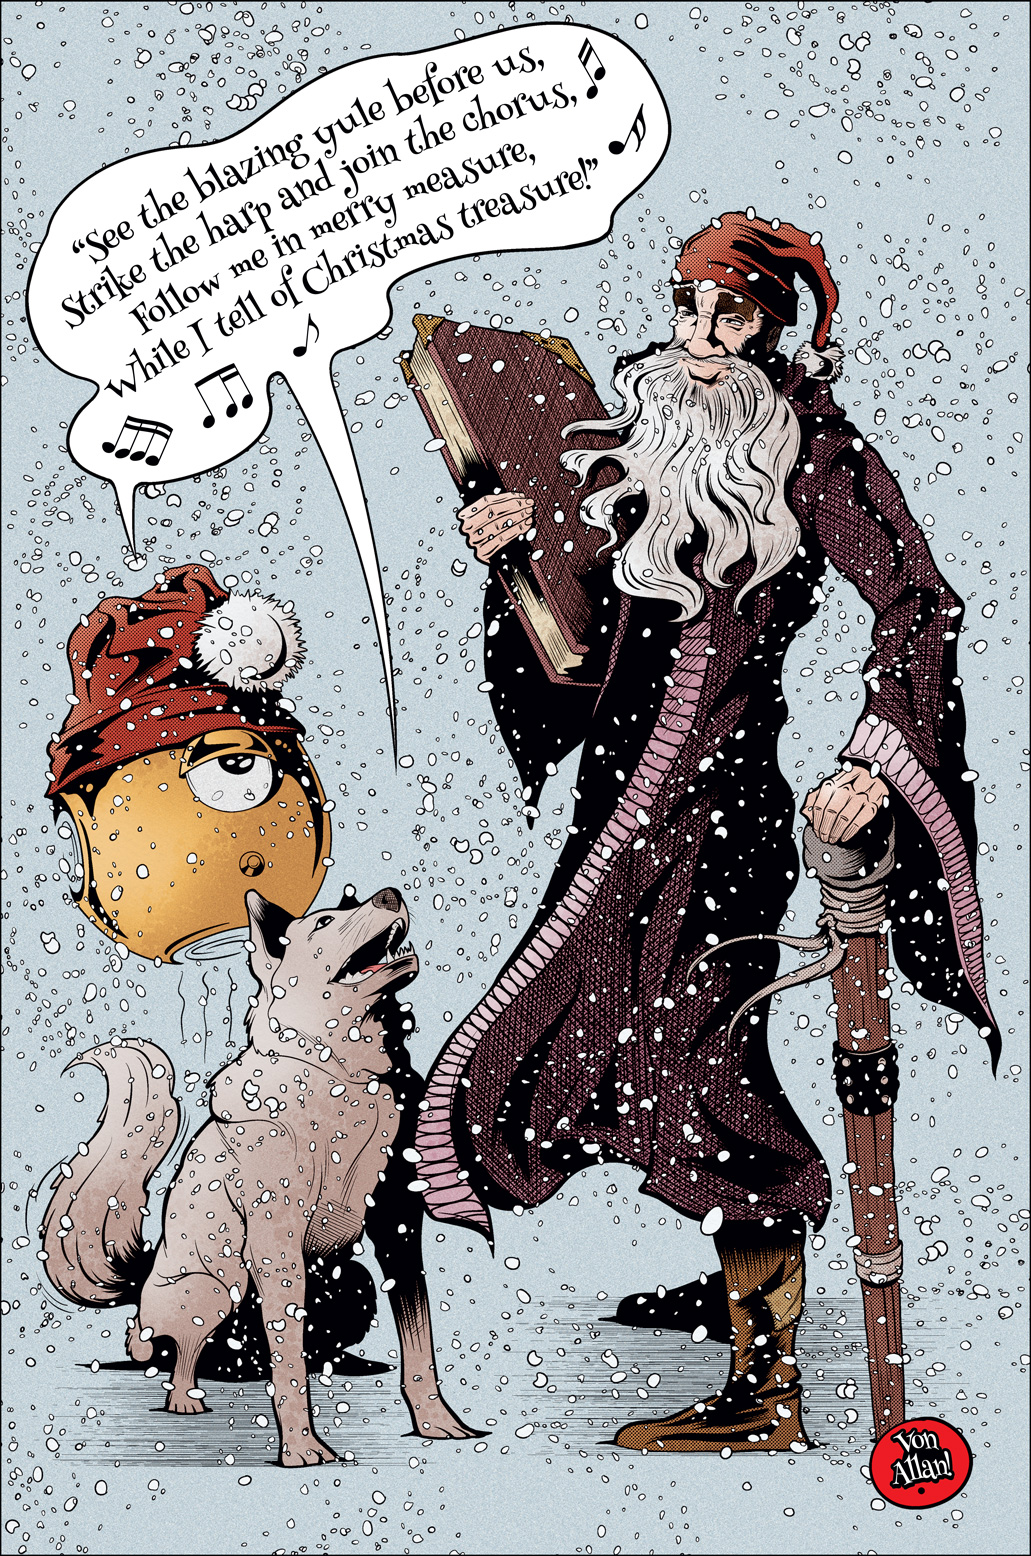 Final colour version for a Bill and Butch Wizards Christmas Card by Von Allan